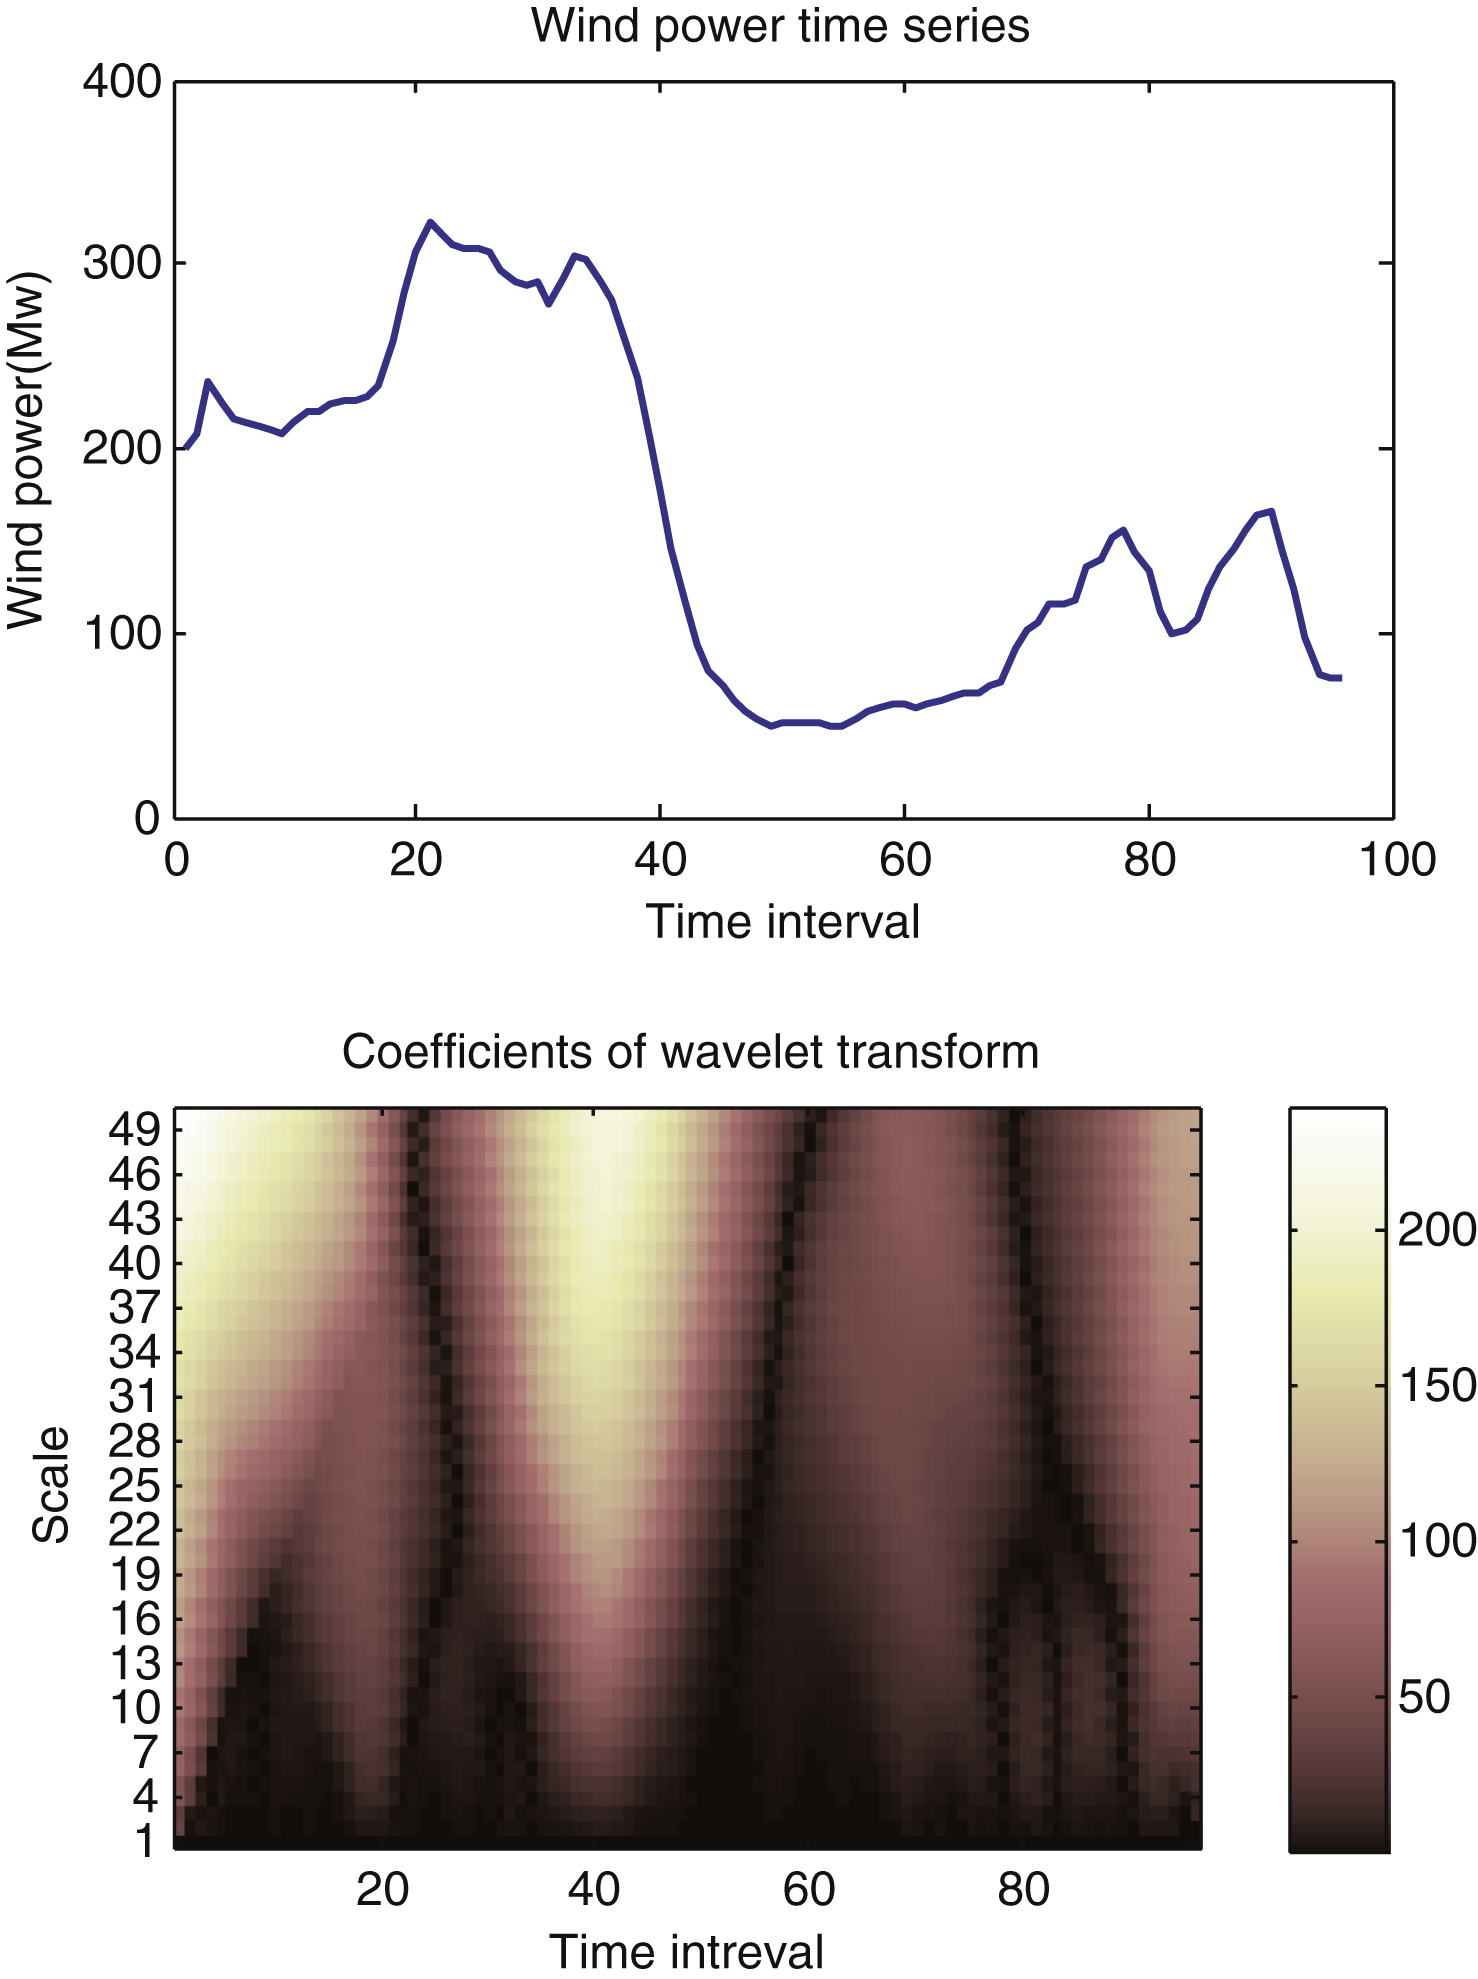 Wind power time series and coefficients after haar wavelet transform.